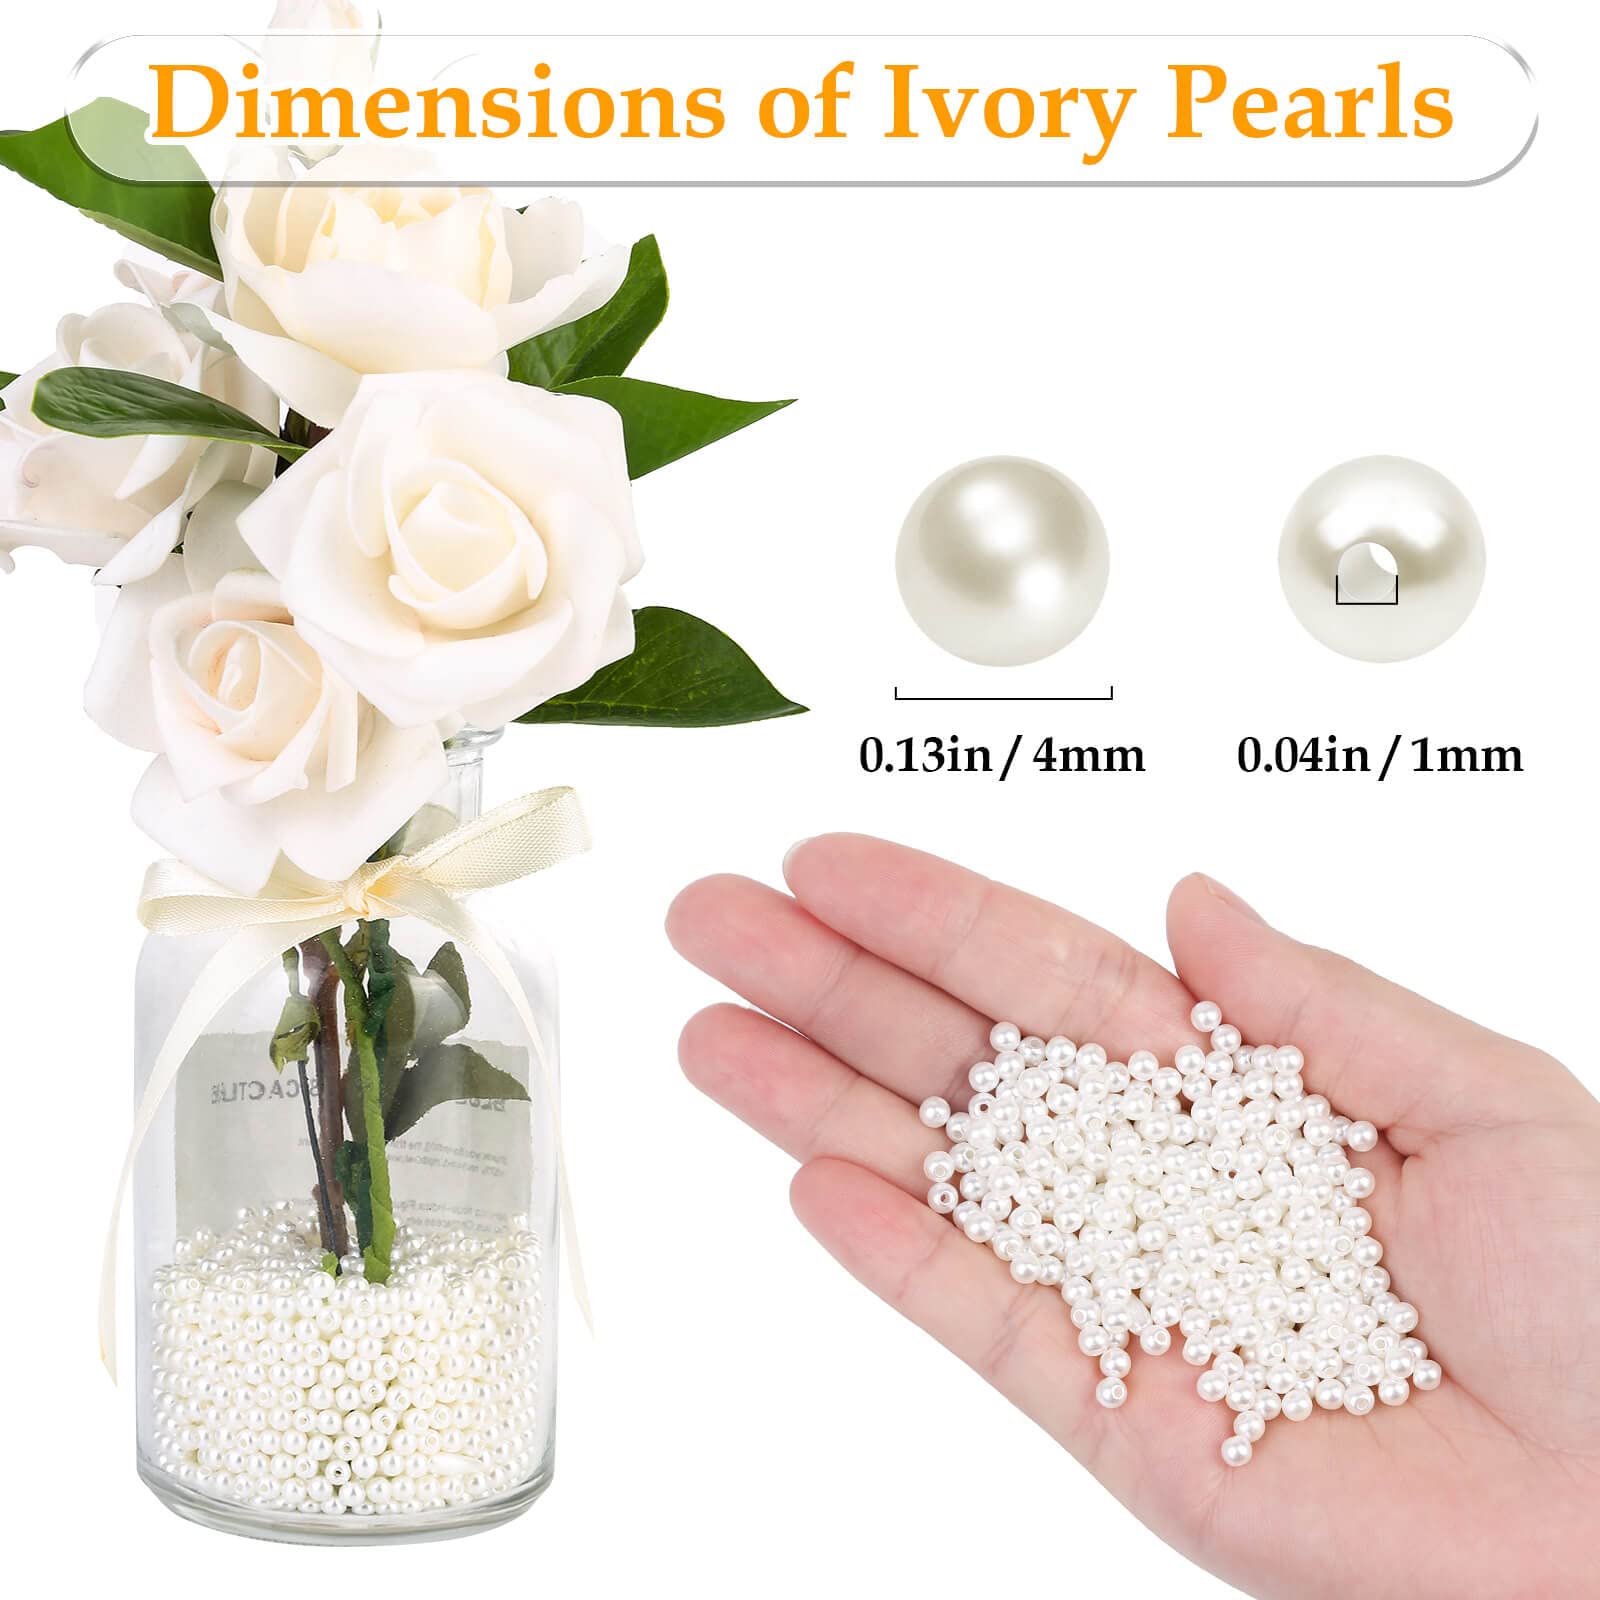 KORENJUL Pearl Beads for Jewelry Making, 2091 Pcs Tiny Smooth White Pearl  Craft Beads Round Loose Pearls Faux Pearl Resin Beads for Jewelry Making